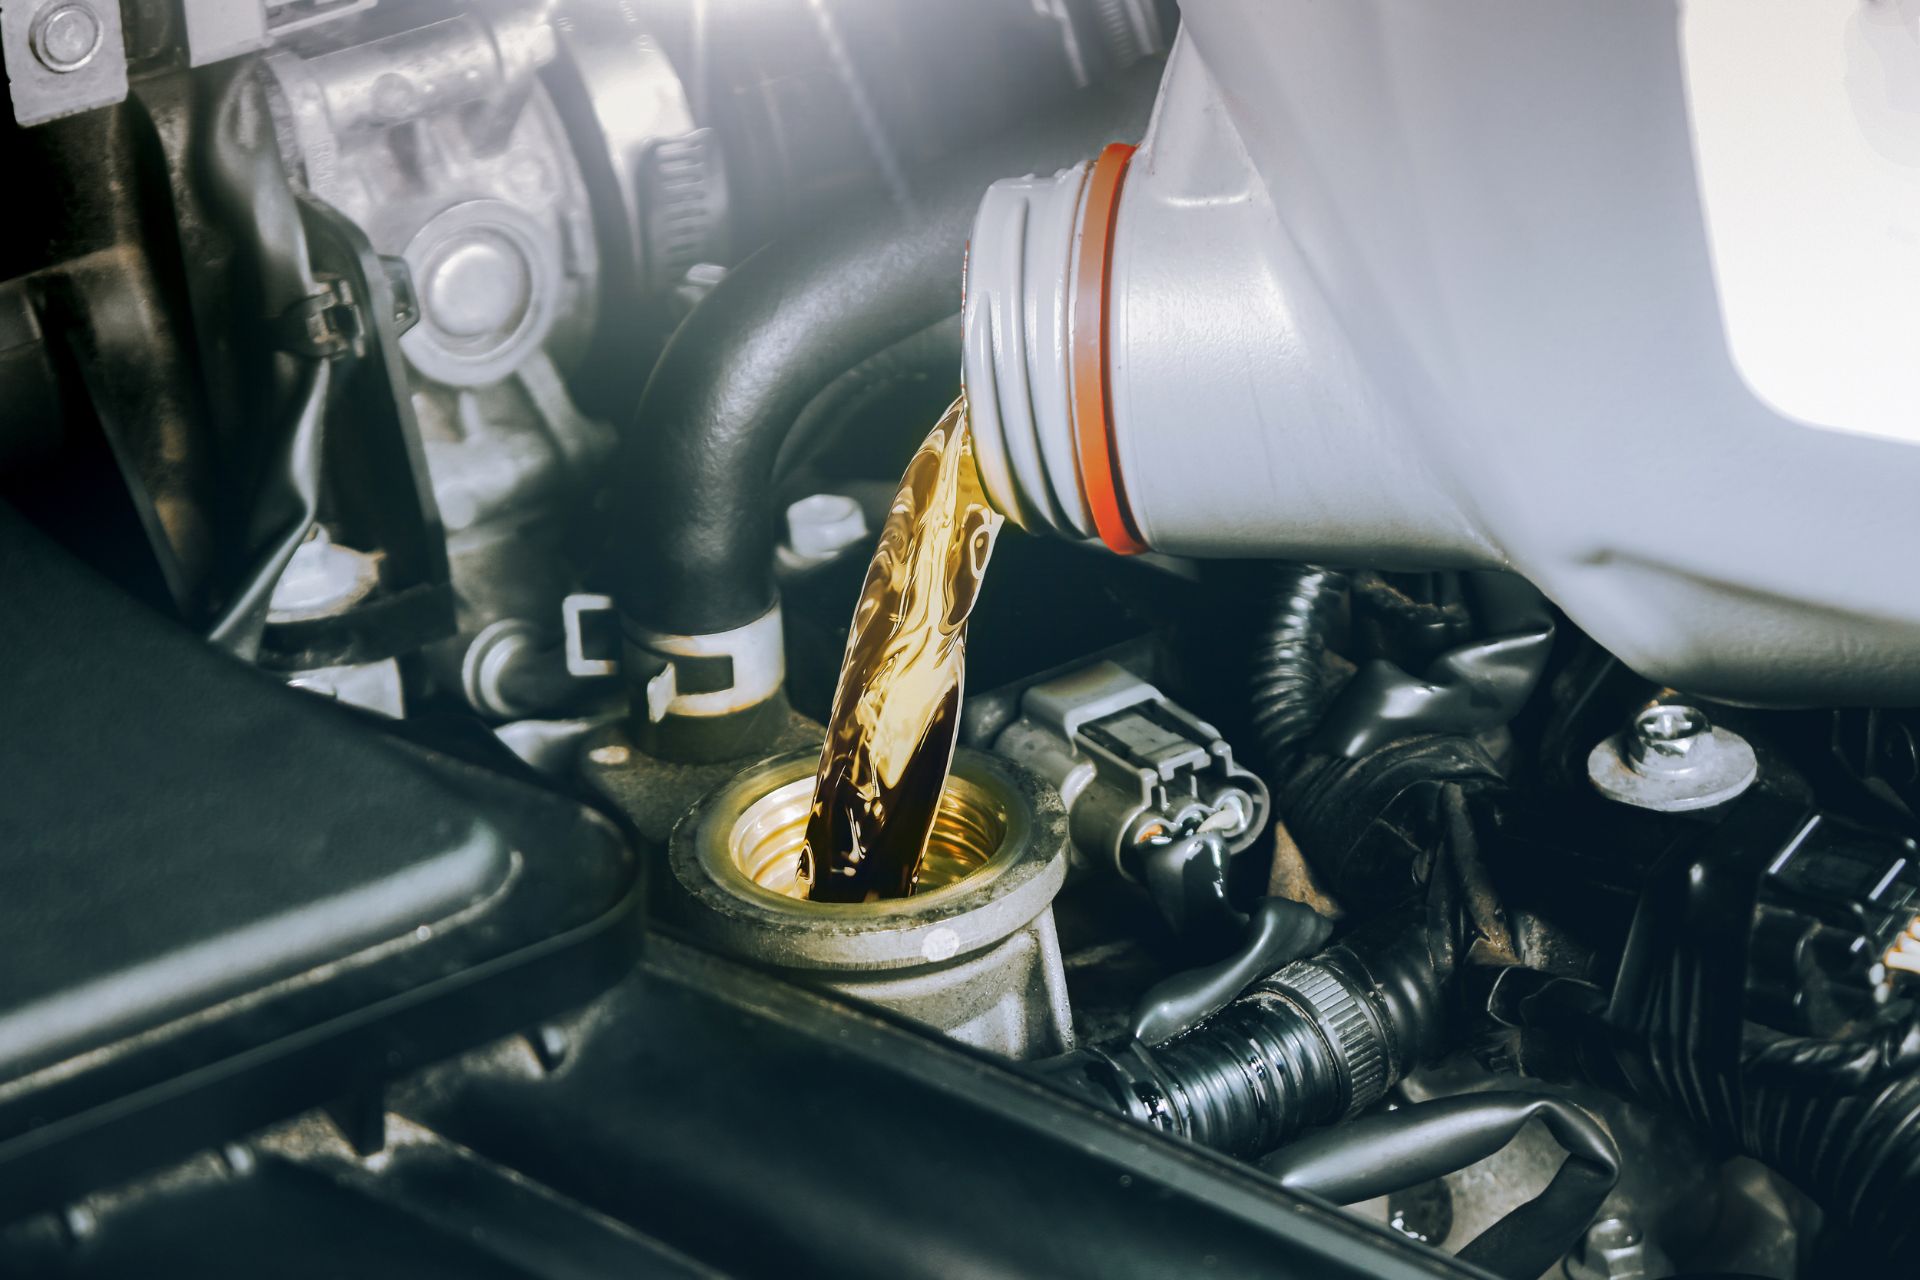 The DIY Oil Change Dilemma: Why It’s Not Worth the Effort, Just Go to an Auto Shop